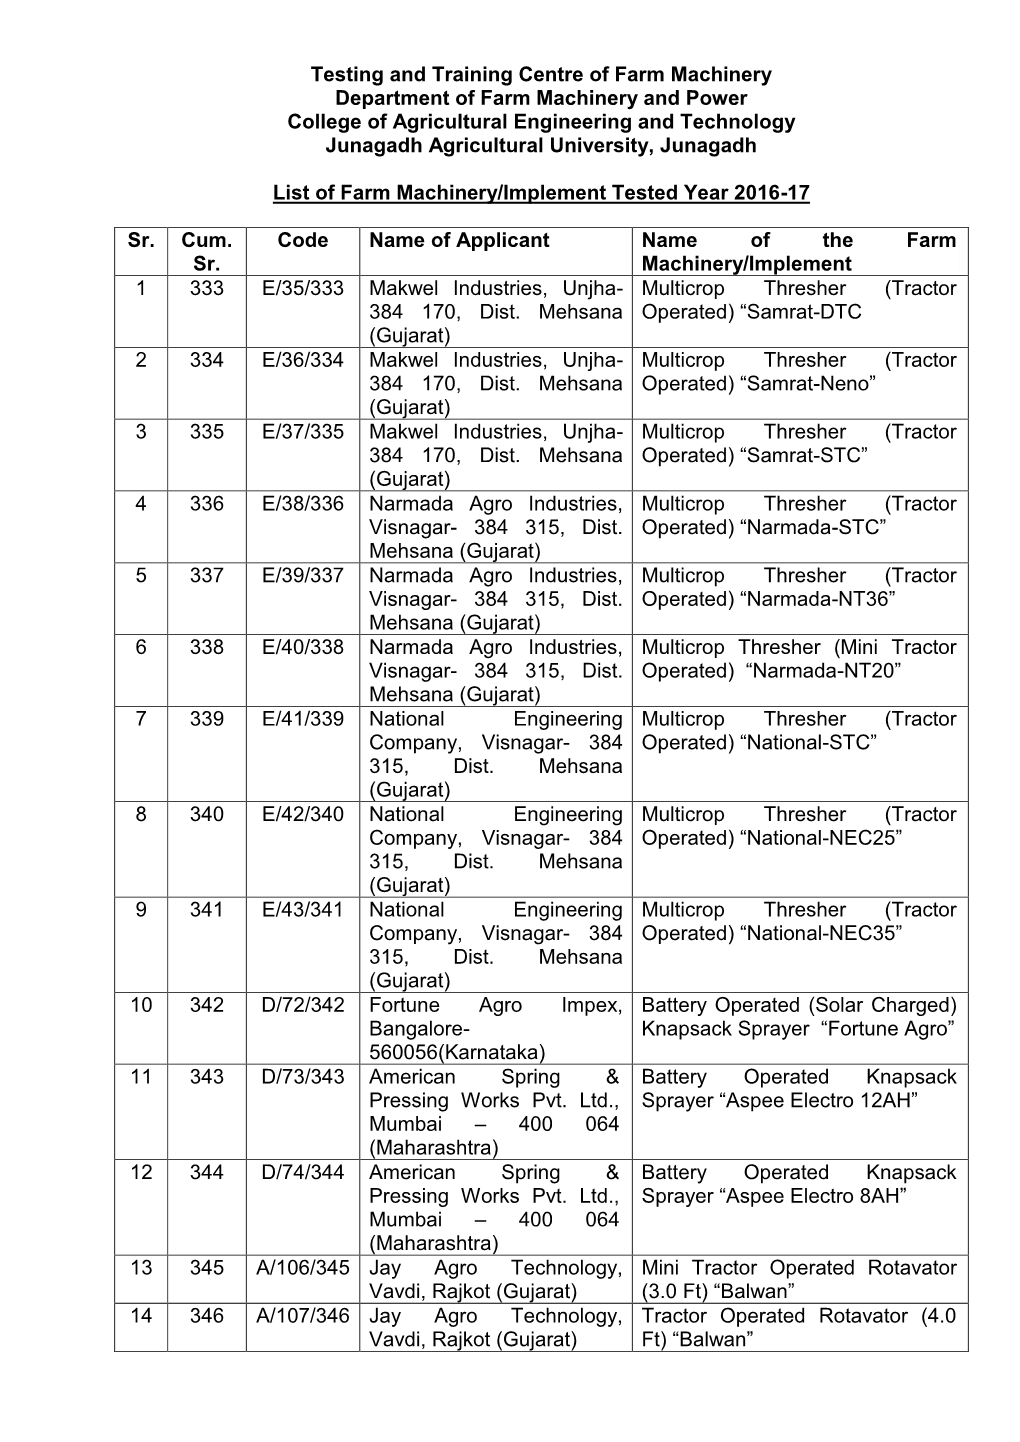 List of Farm Machinery / Implement Tested (Year 2016-17)